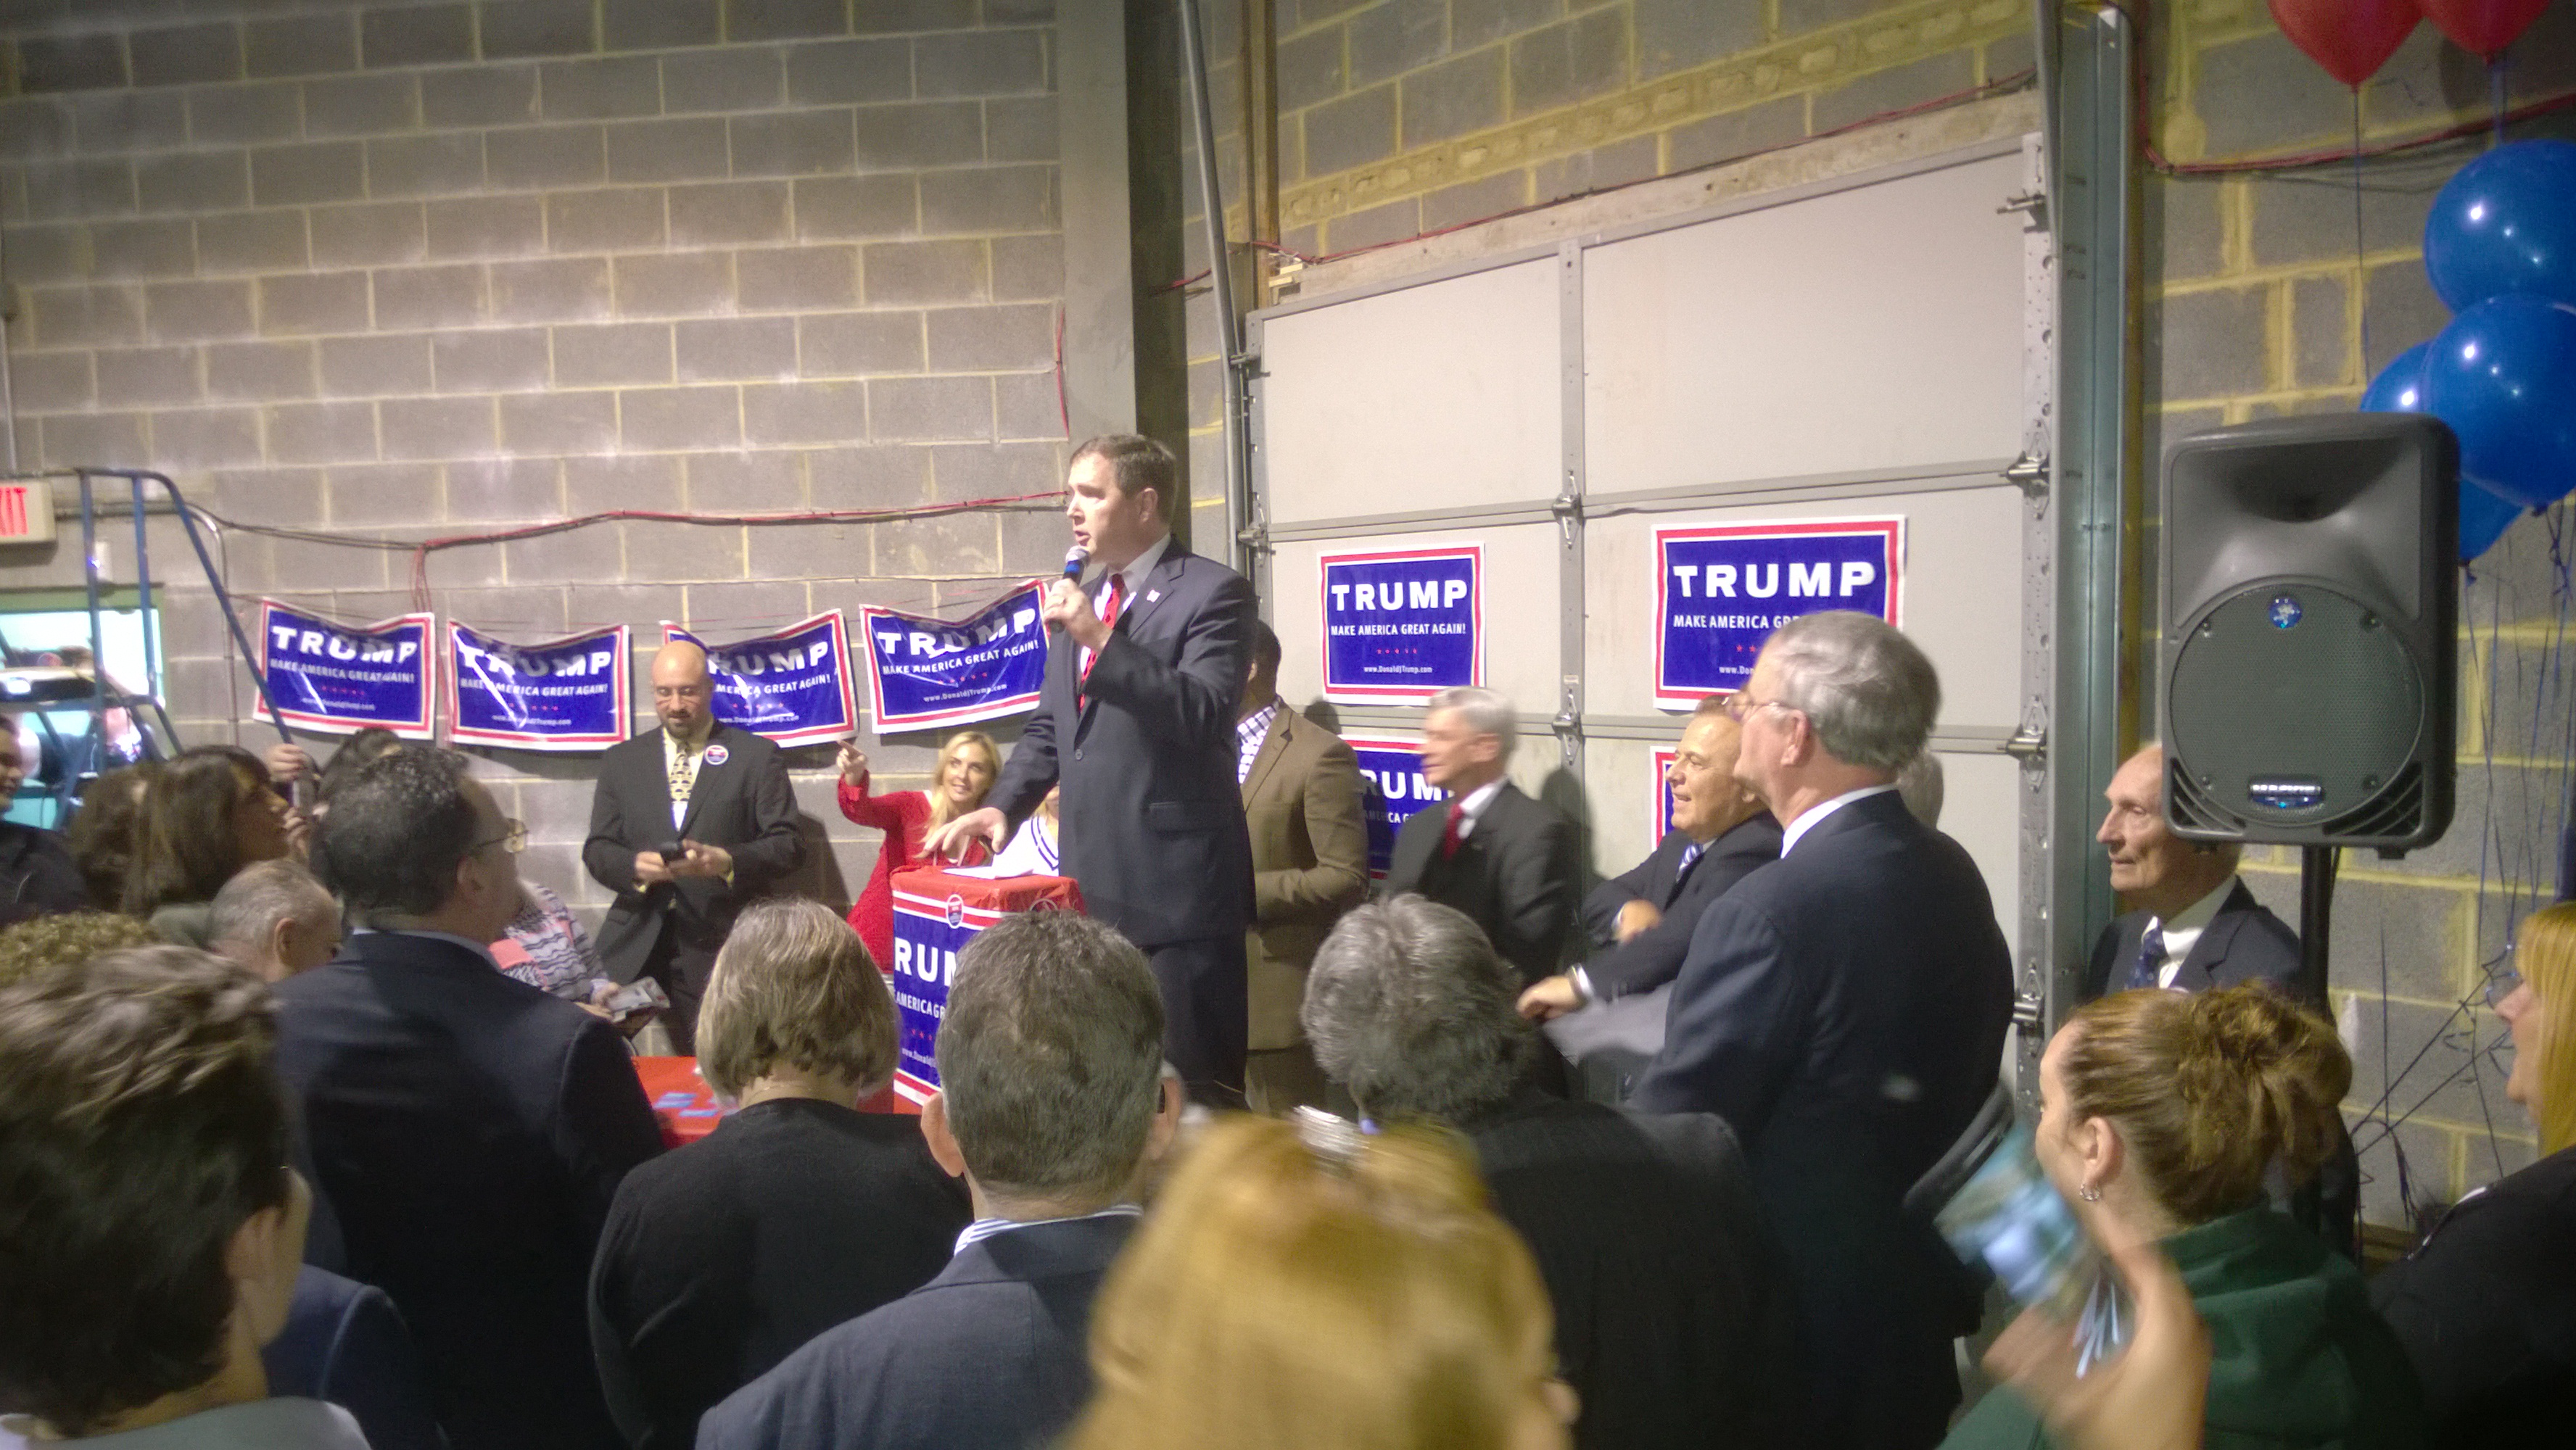 Senator Mike Doherty speaks in Edison, NJ on May 3rd, 2016 at the opening of the Trump headquarters in Edison, NJ